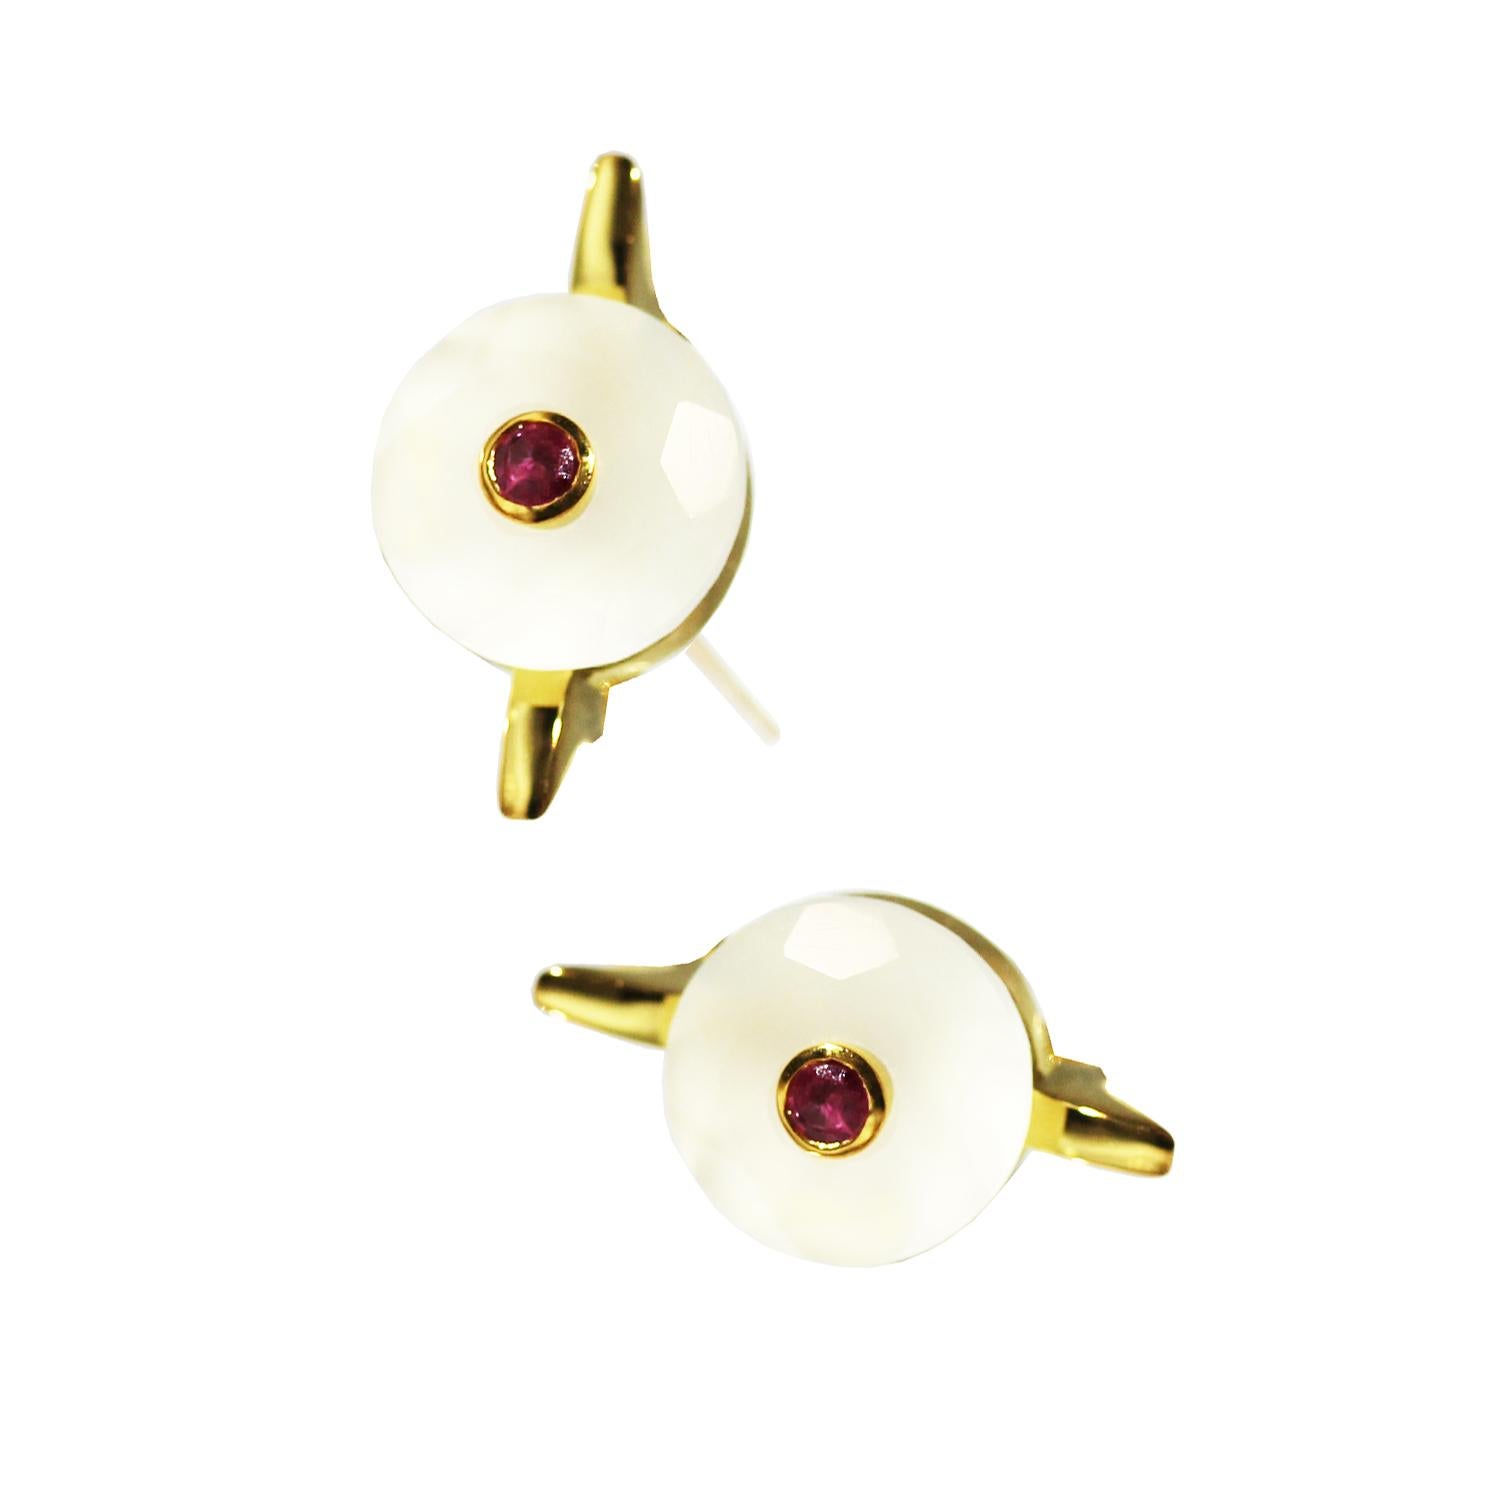 This modern handmade British 9 karat yellow gold earring studs, set with lapis lazuli and natural ruby in the center is from MAIKO NAGAYAMA's one of the Pret-a-porter Collection called 